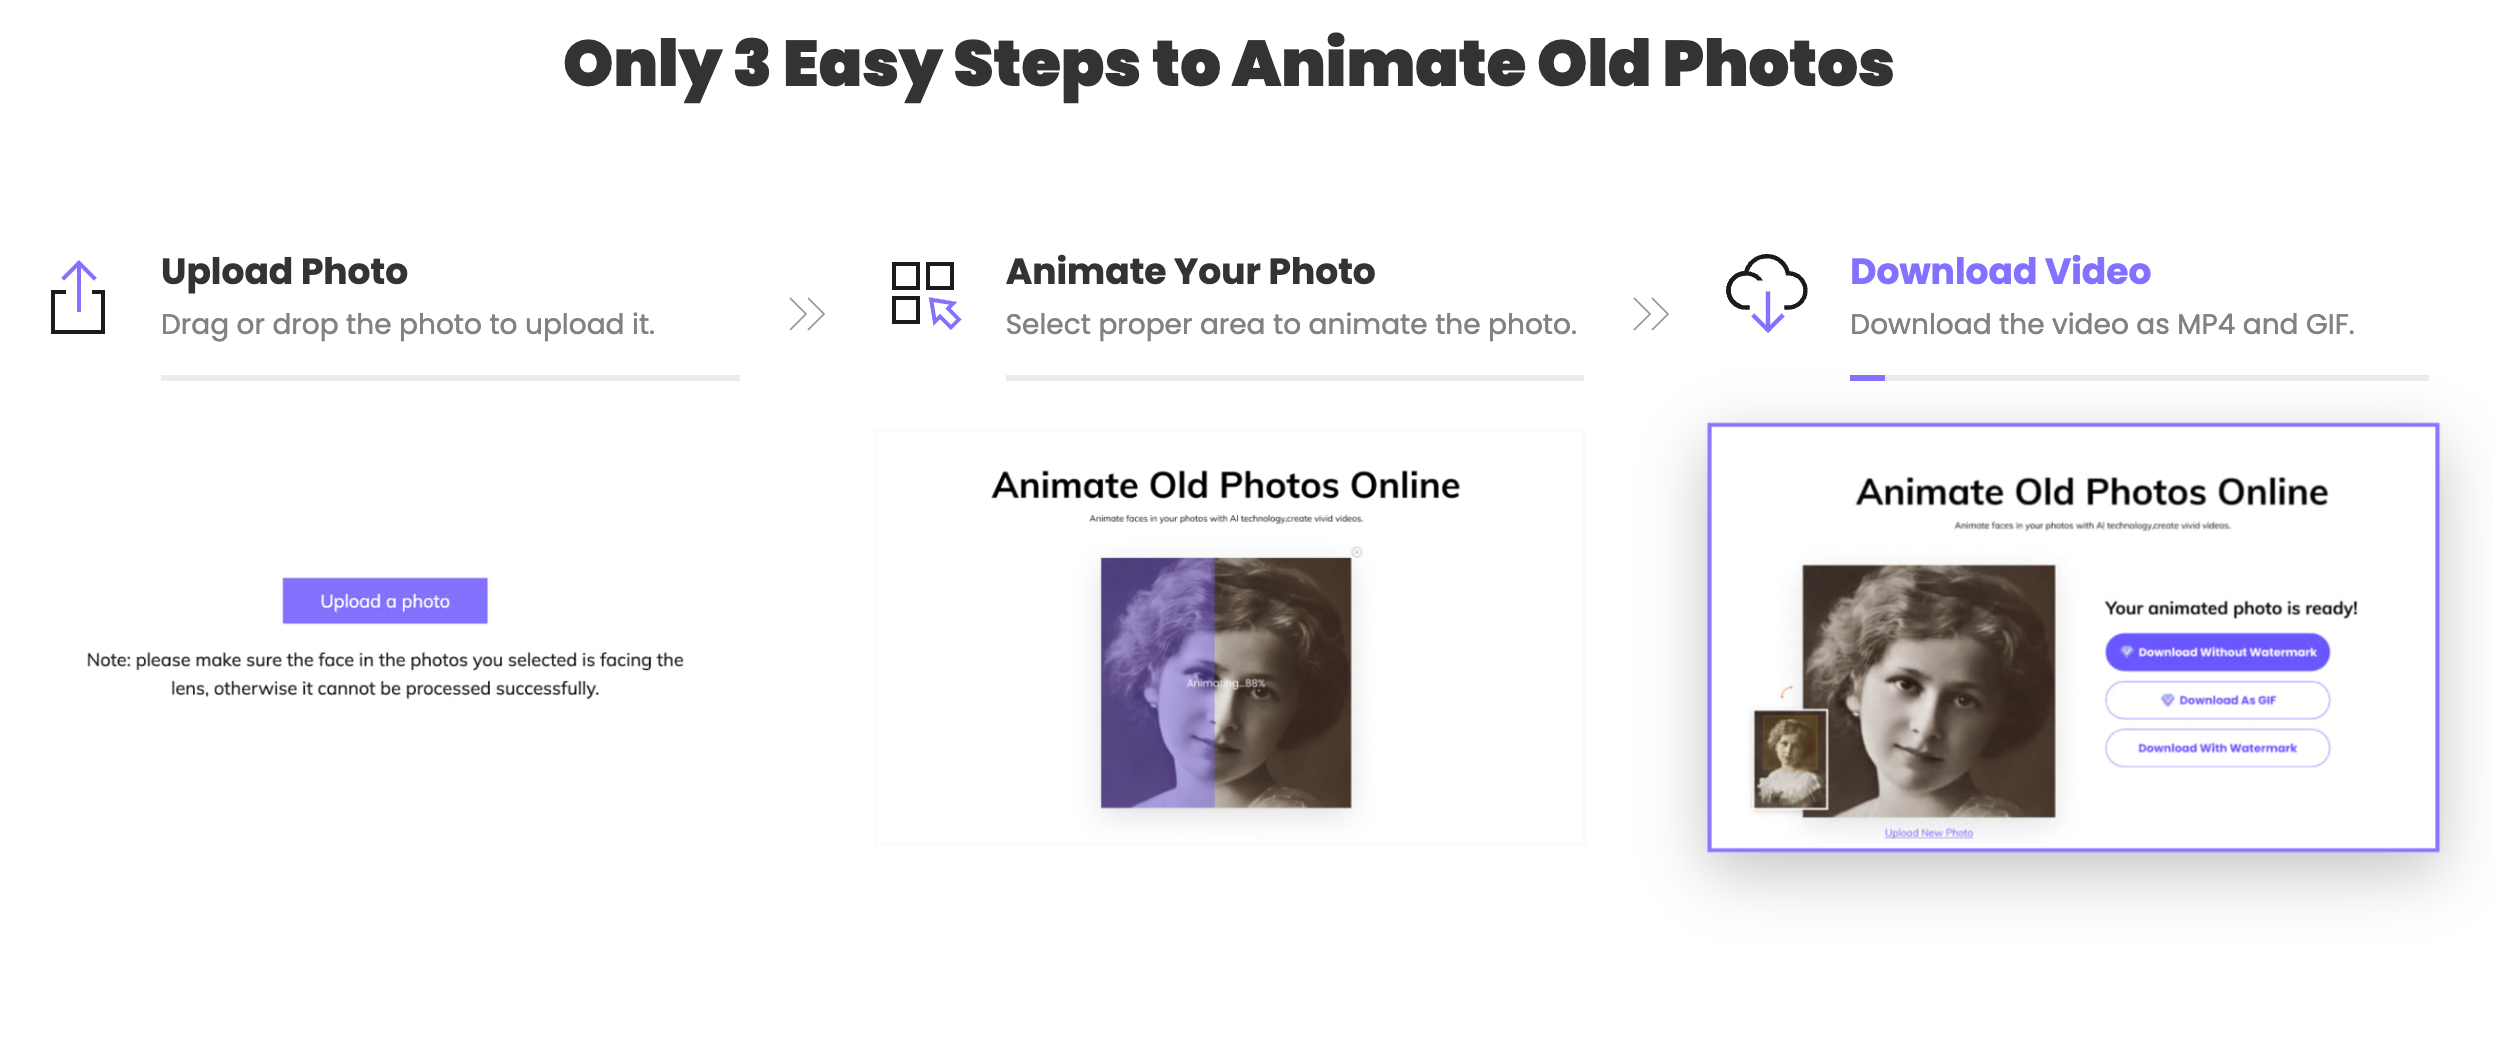 HitPaw screenshot that shows 3 easy steps to animate old photos